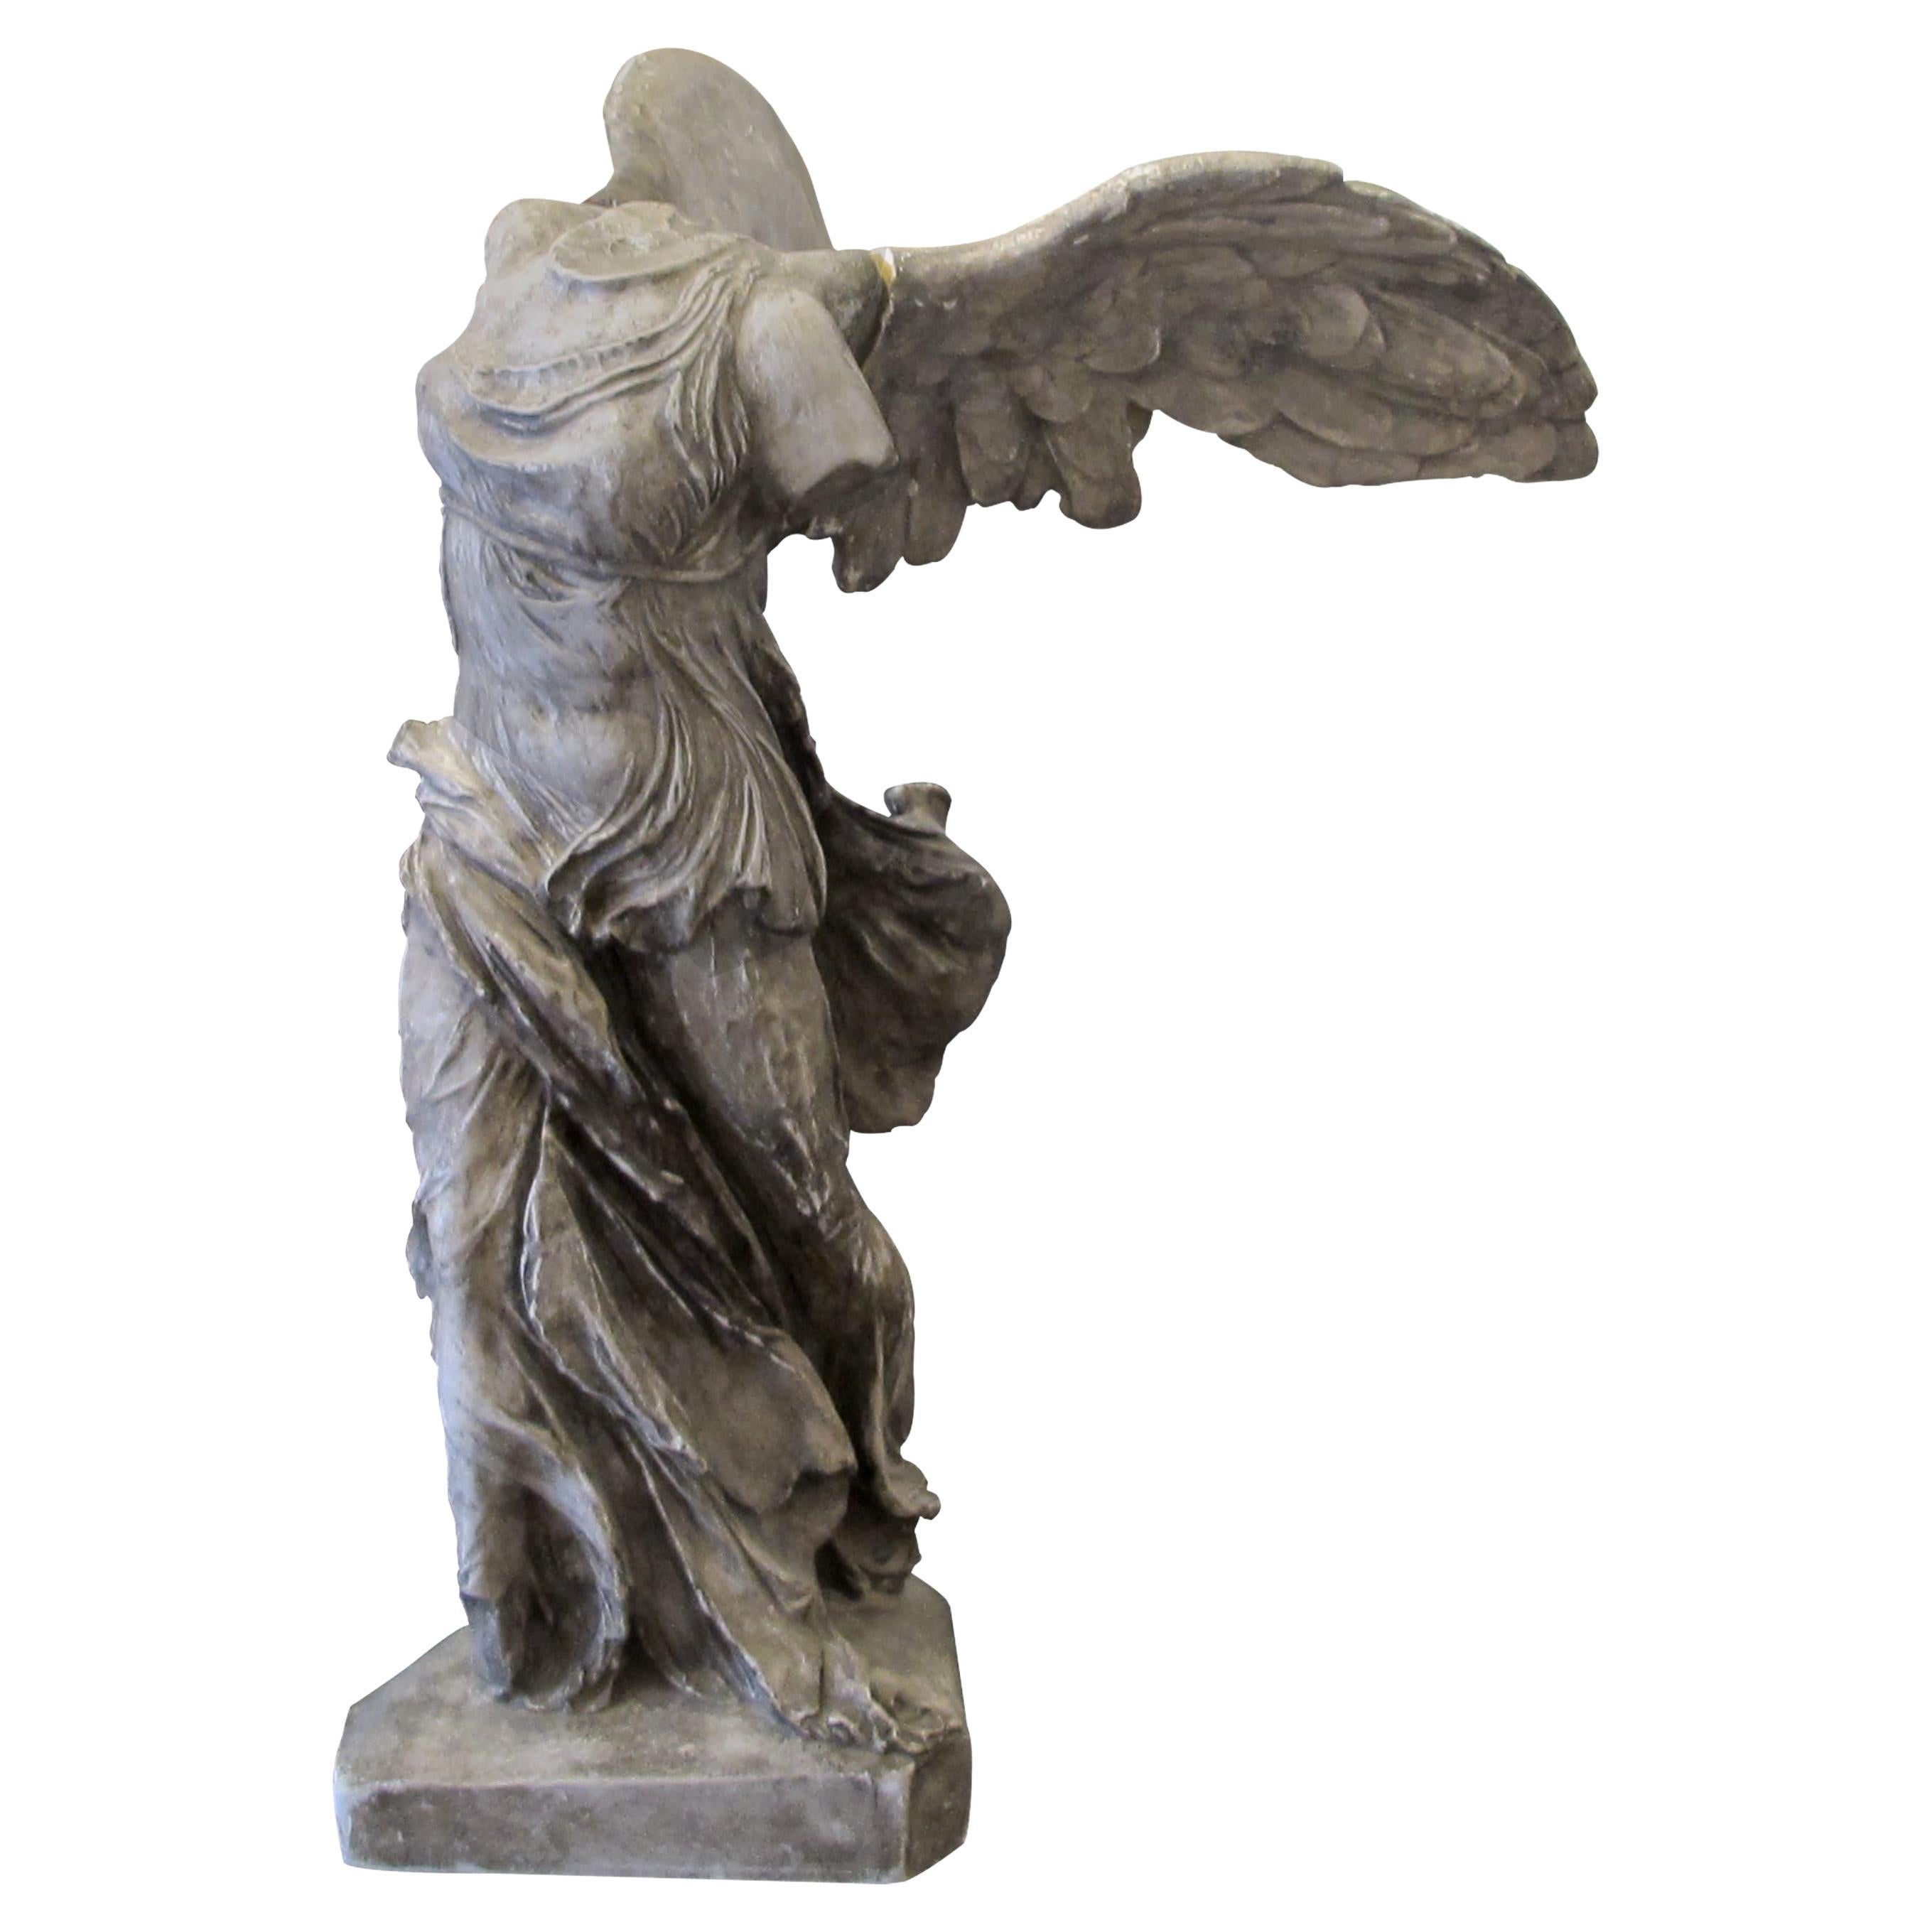 Nike Winged Victory - 16 For Sale on 1stDibs